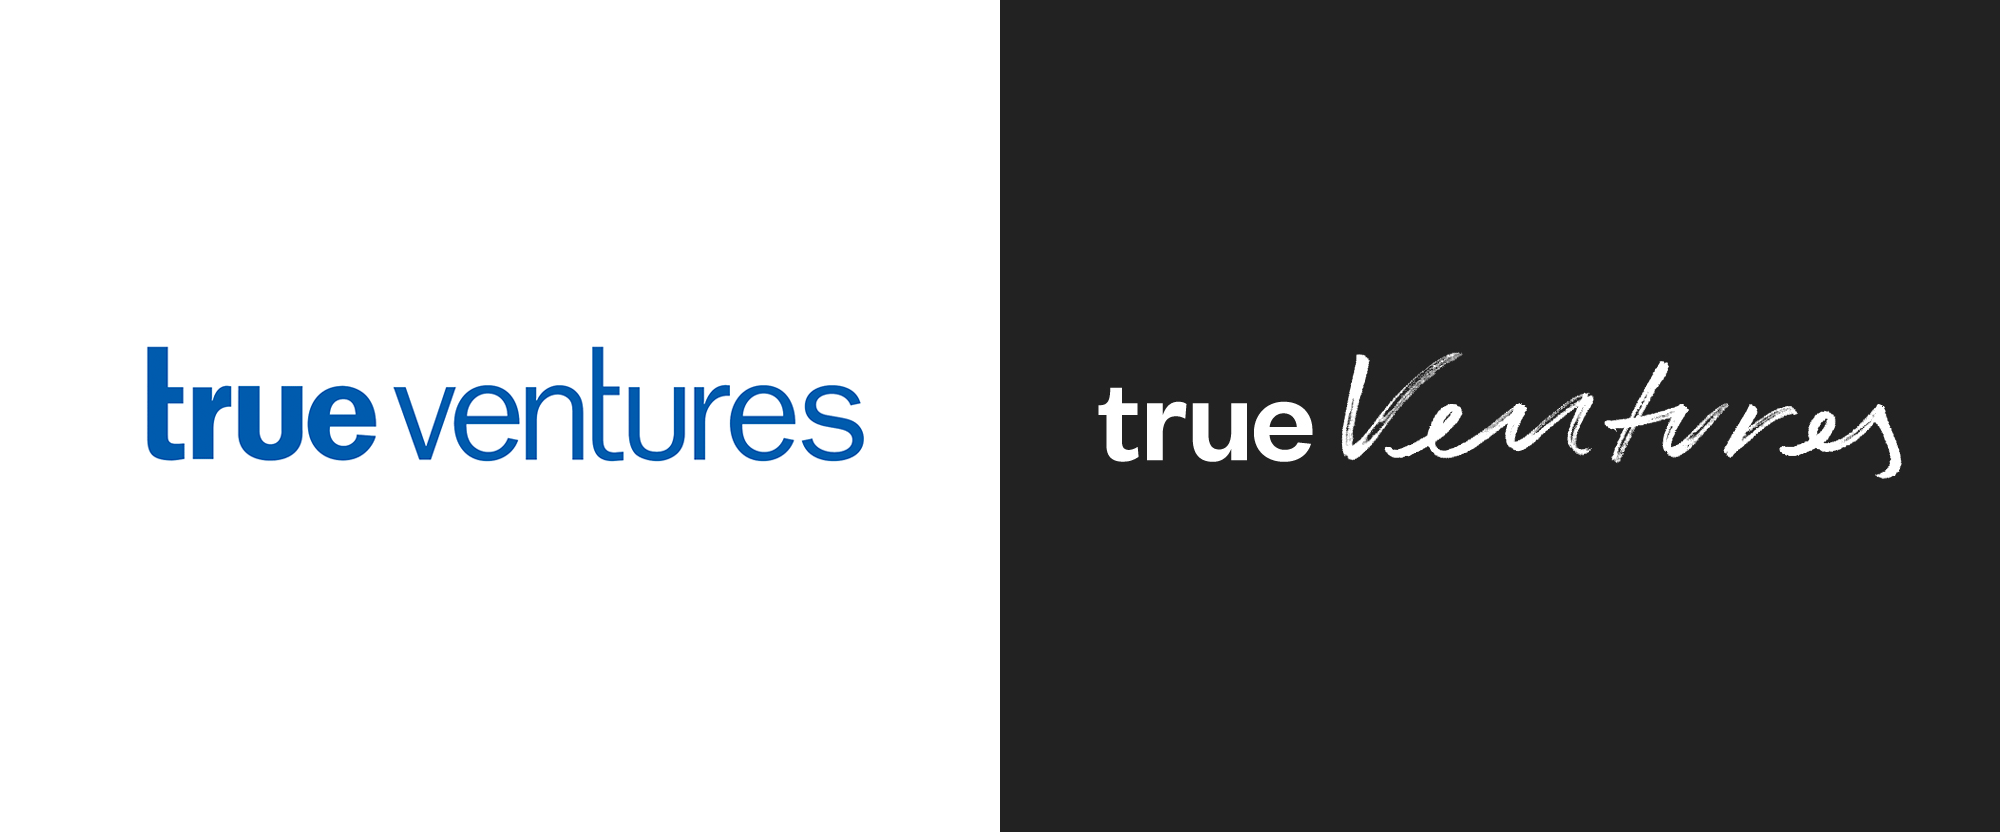 New Logo and Identity for True Ventures by Ueno